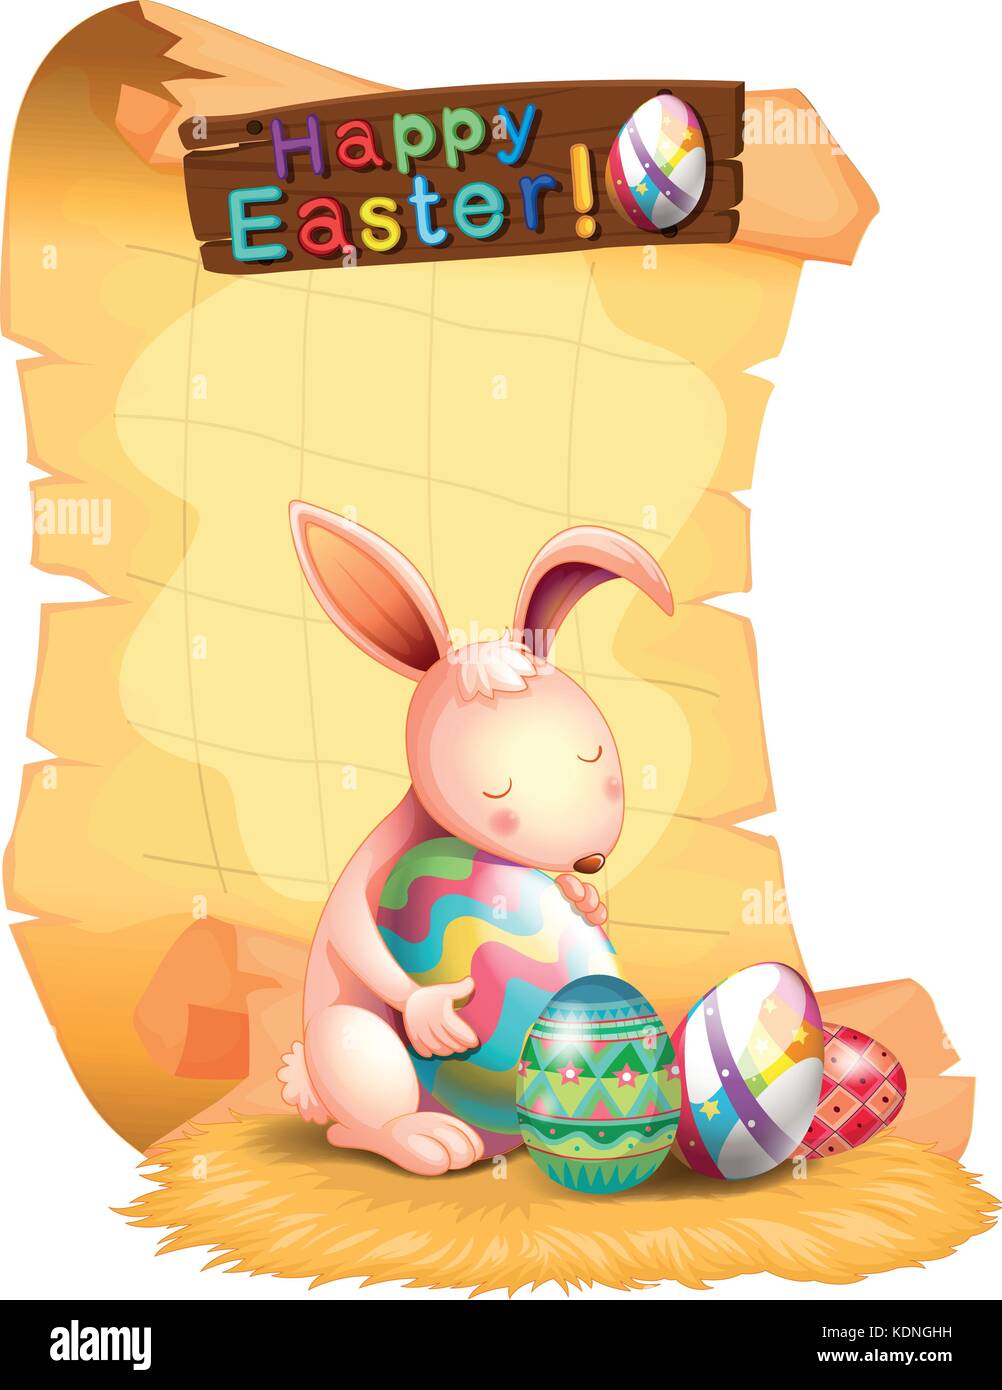 Happy Easter poster with bunny and rainbow eggs illustration Stock